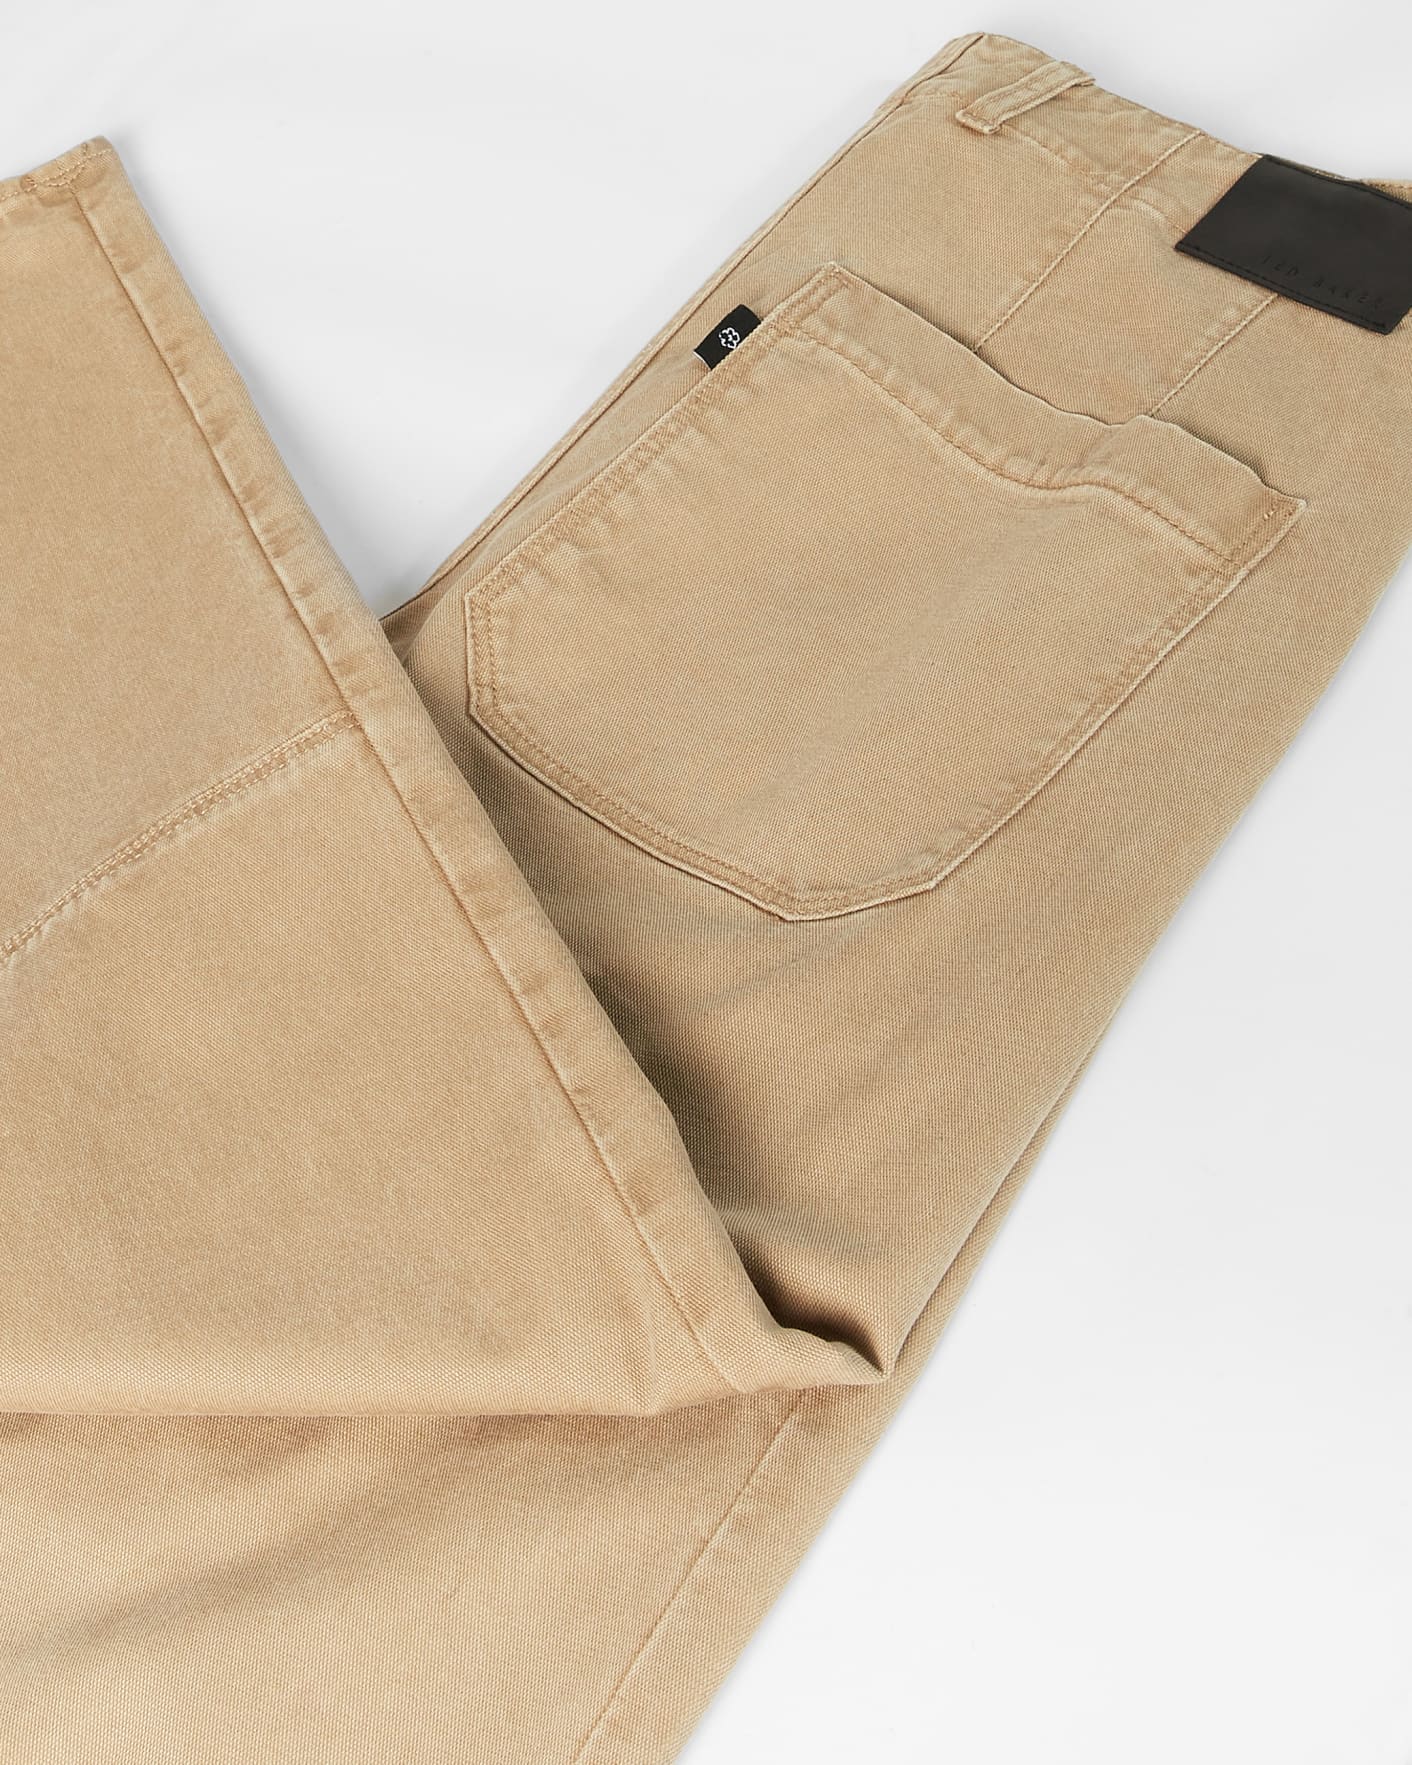 Brown-Chocolate Utility Style Jeans Ted Baker